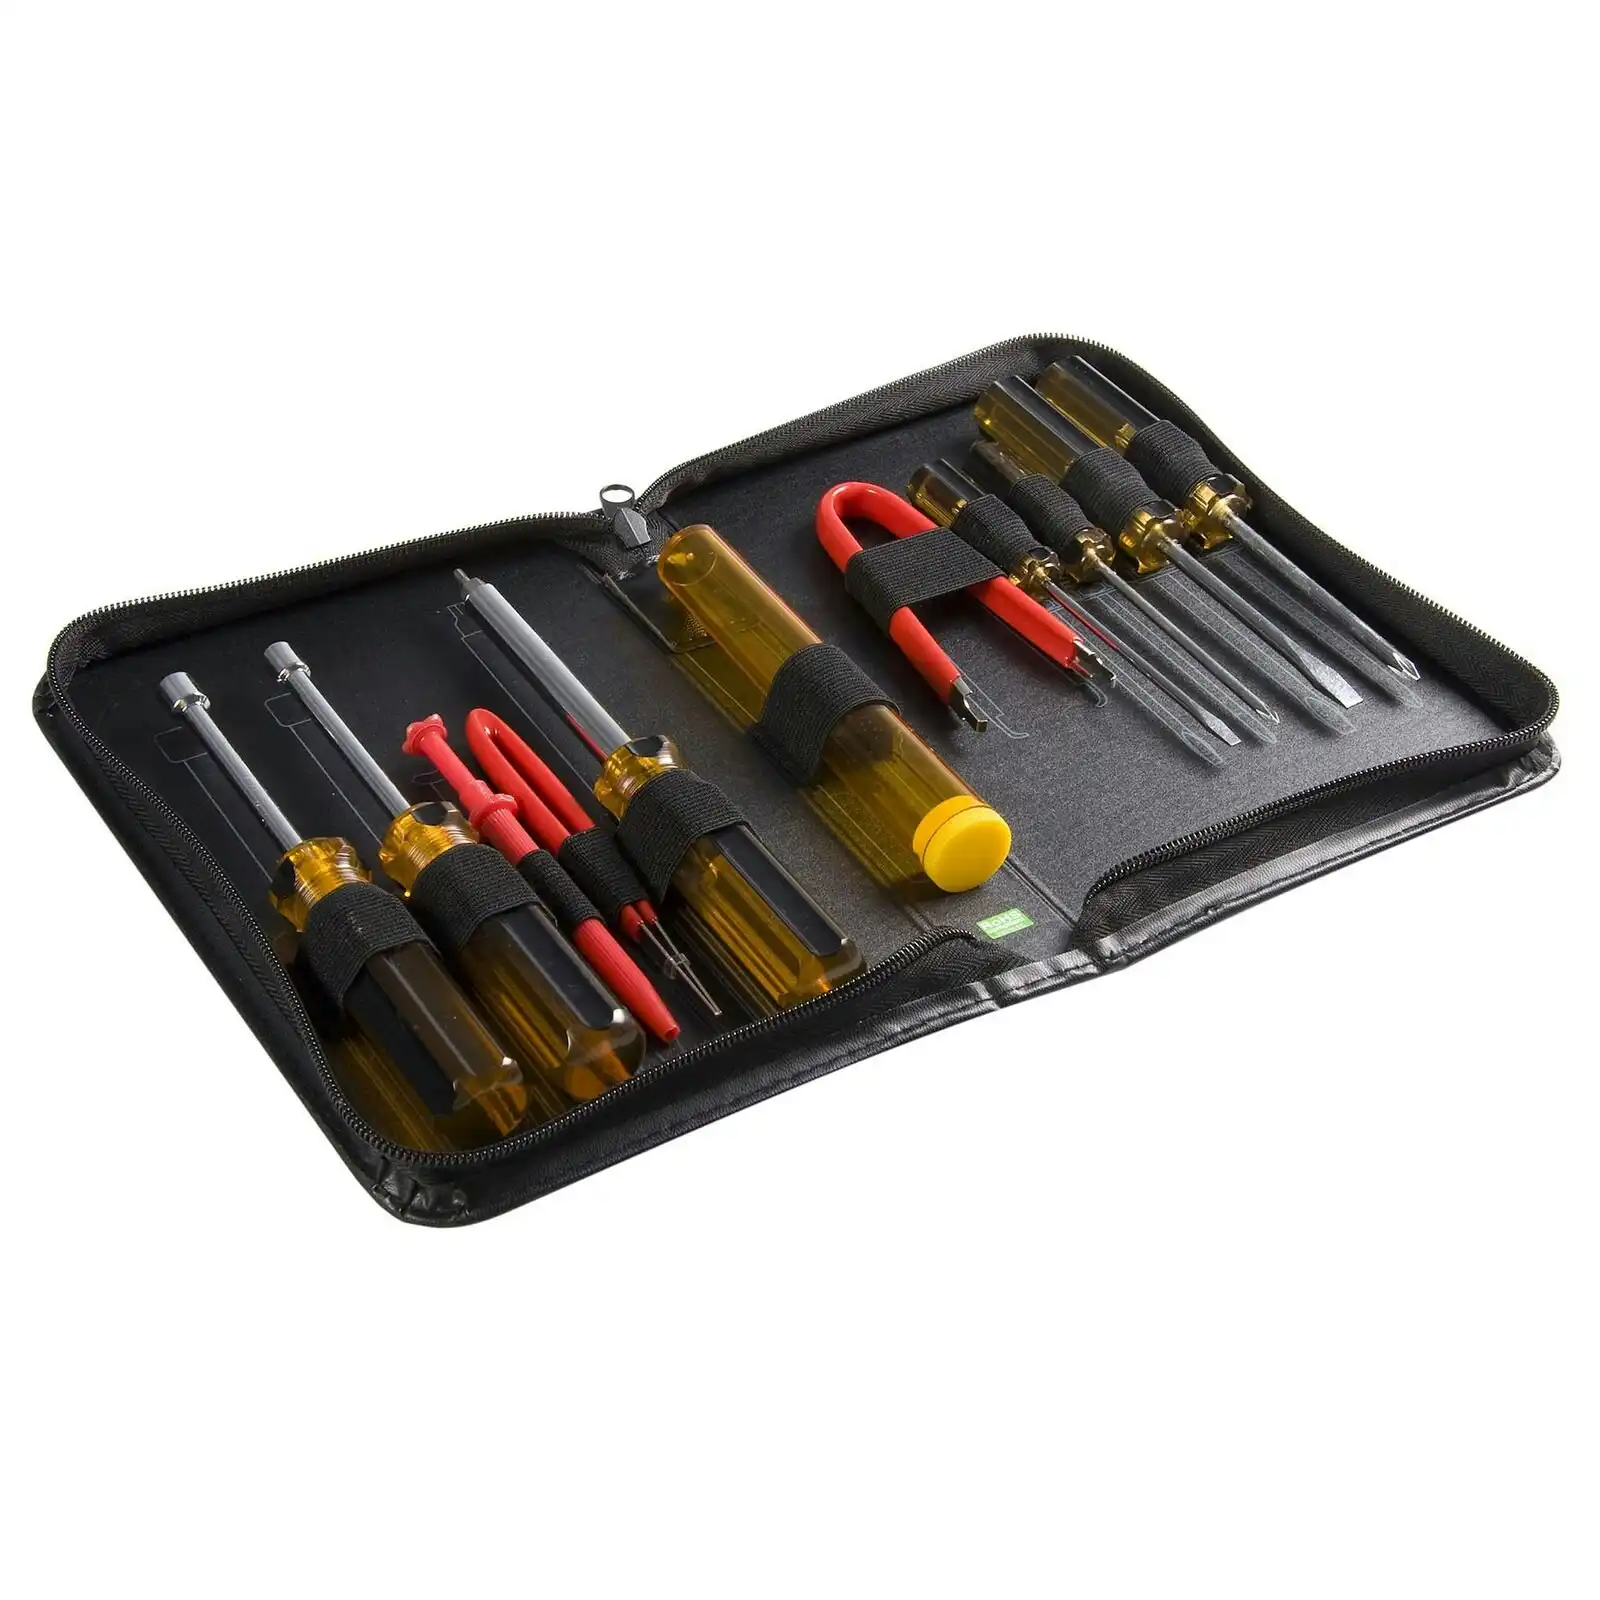 11pc Star Tech PC/Computer Repair Screwdriver/Chip Extractor Tool Kit w/ Case